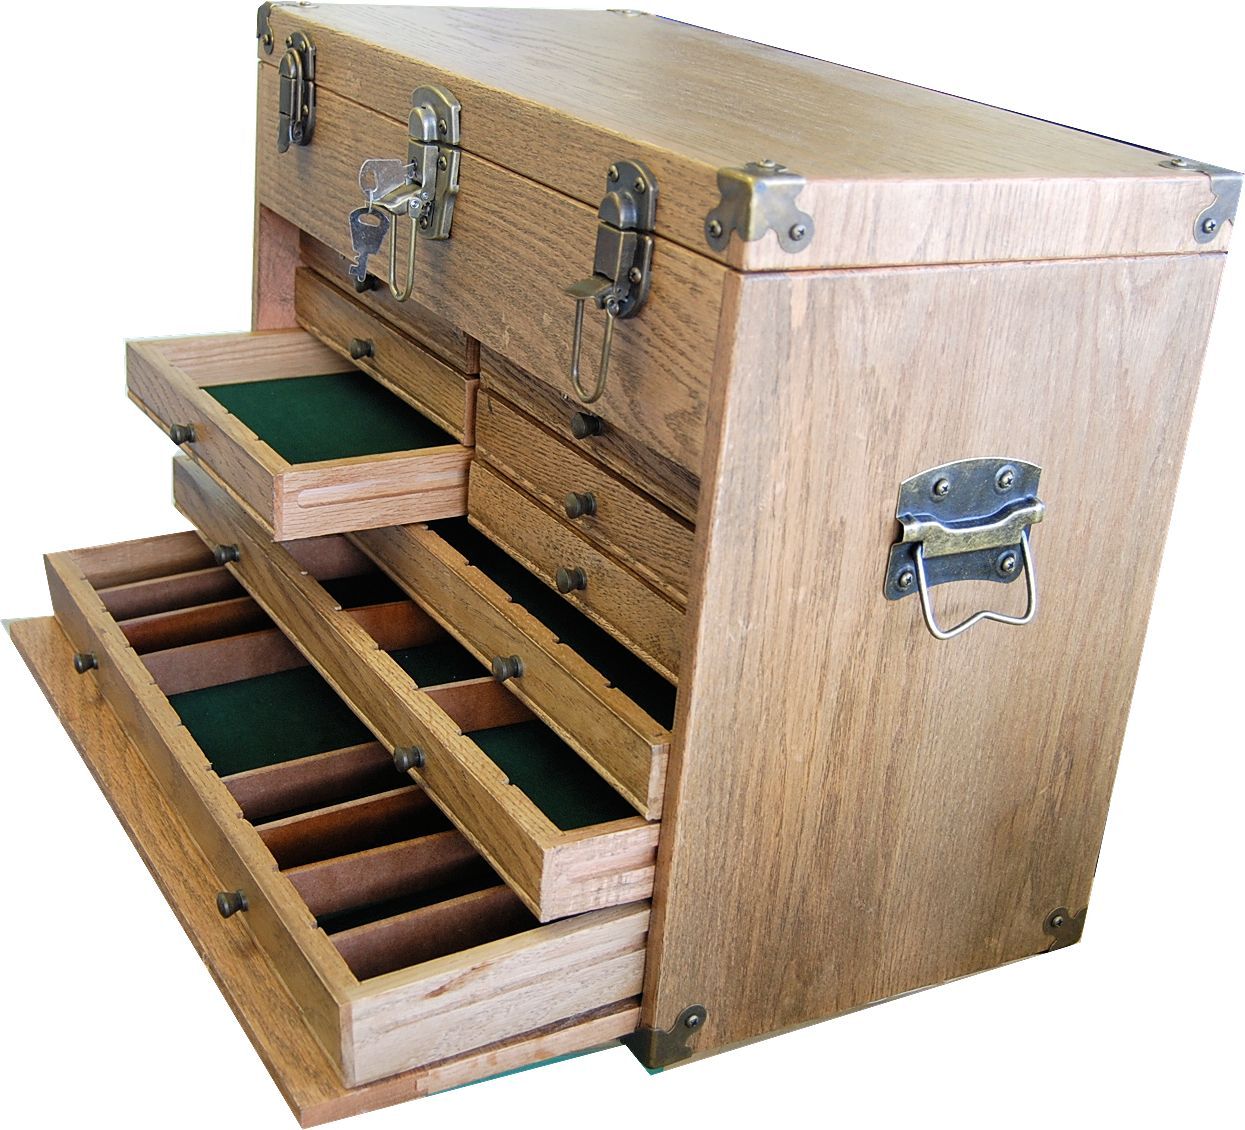 NEW ! Quality 9 Drawer Traditional Toolmakers Cabinet with Dividers SORRY OUT OF STOCK